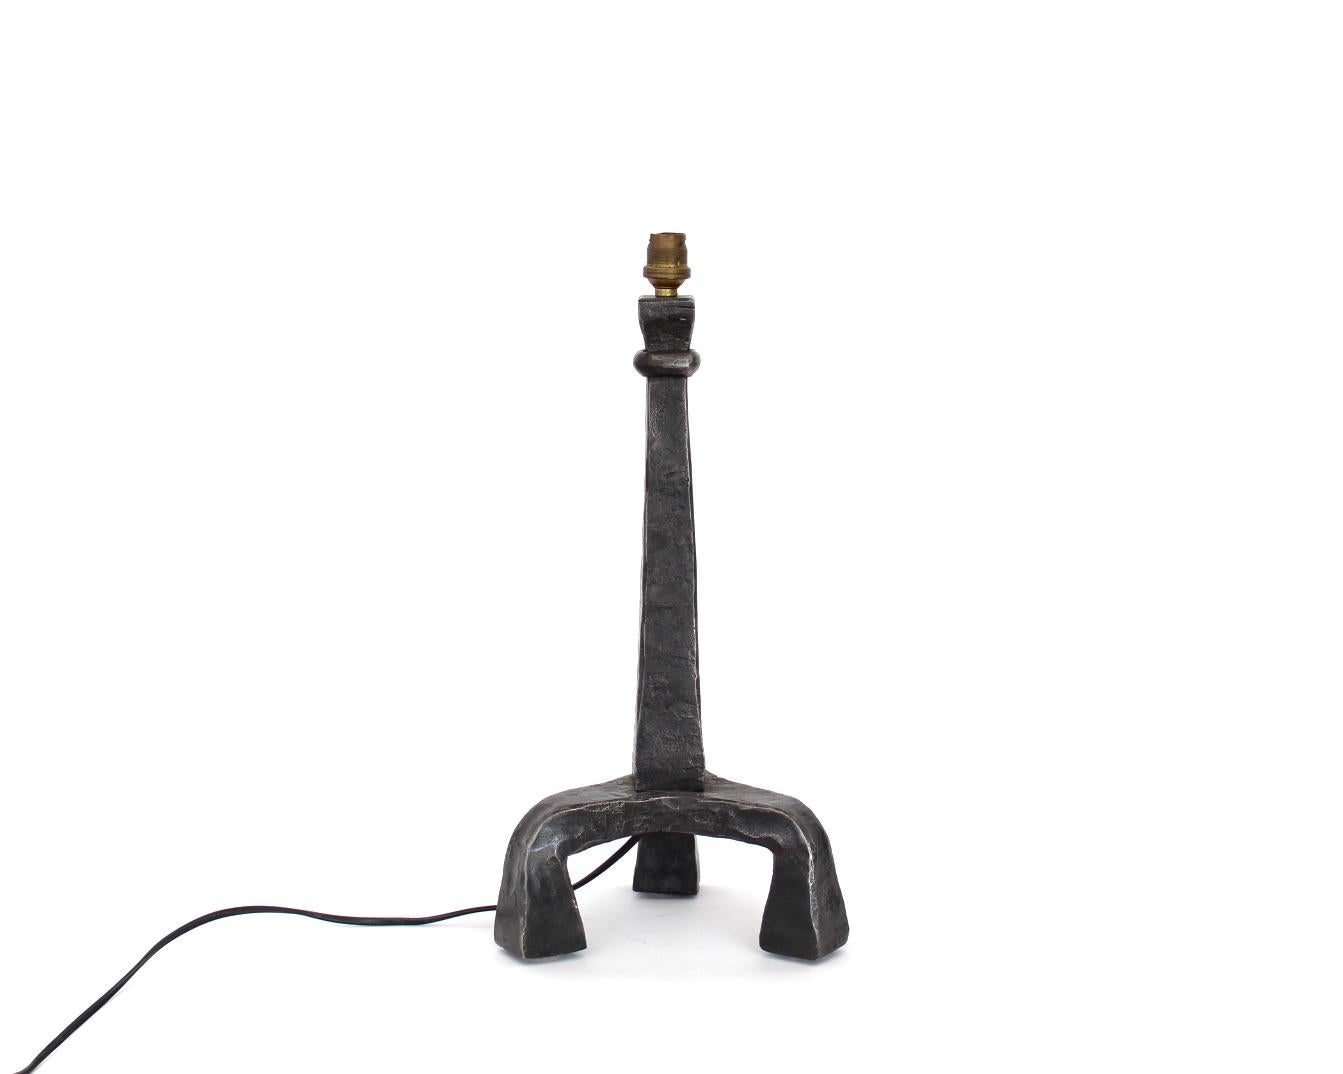 Hand-Crafted French Wrought Iron or Fer Battu Hand Wrought Mid Century Table Lamp